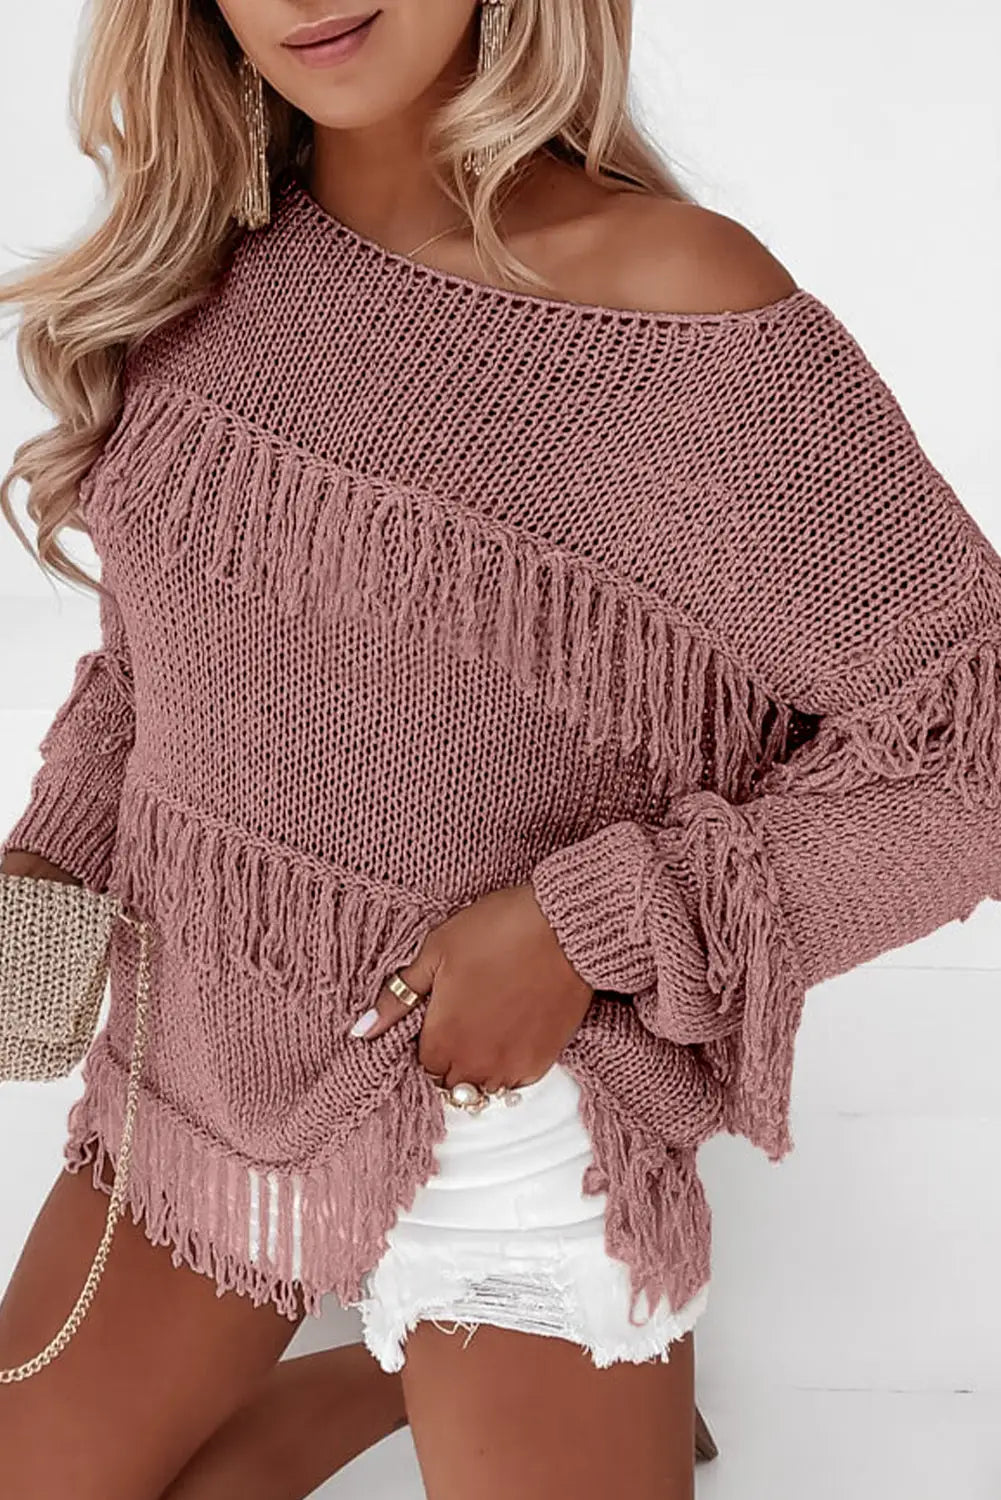 Pink boho tasseled knitted sweater - s / 100% acrylic - tops